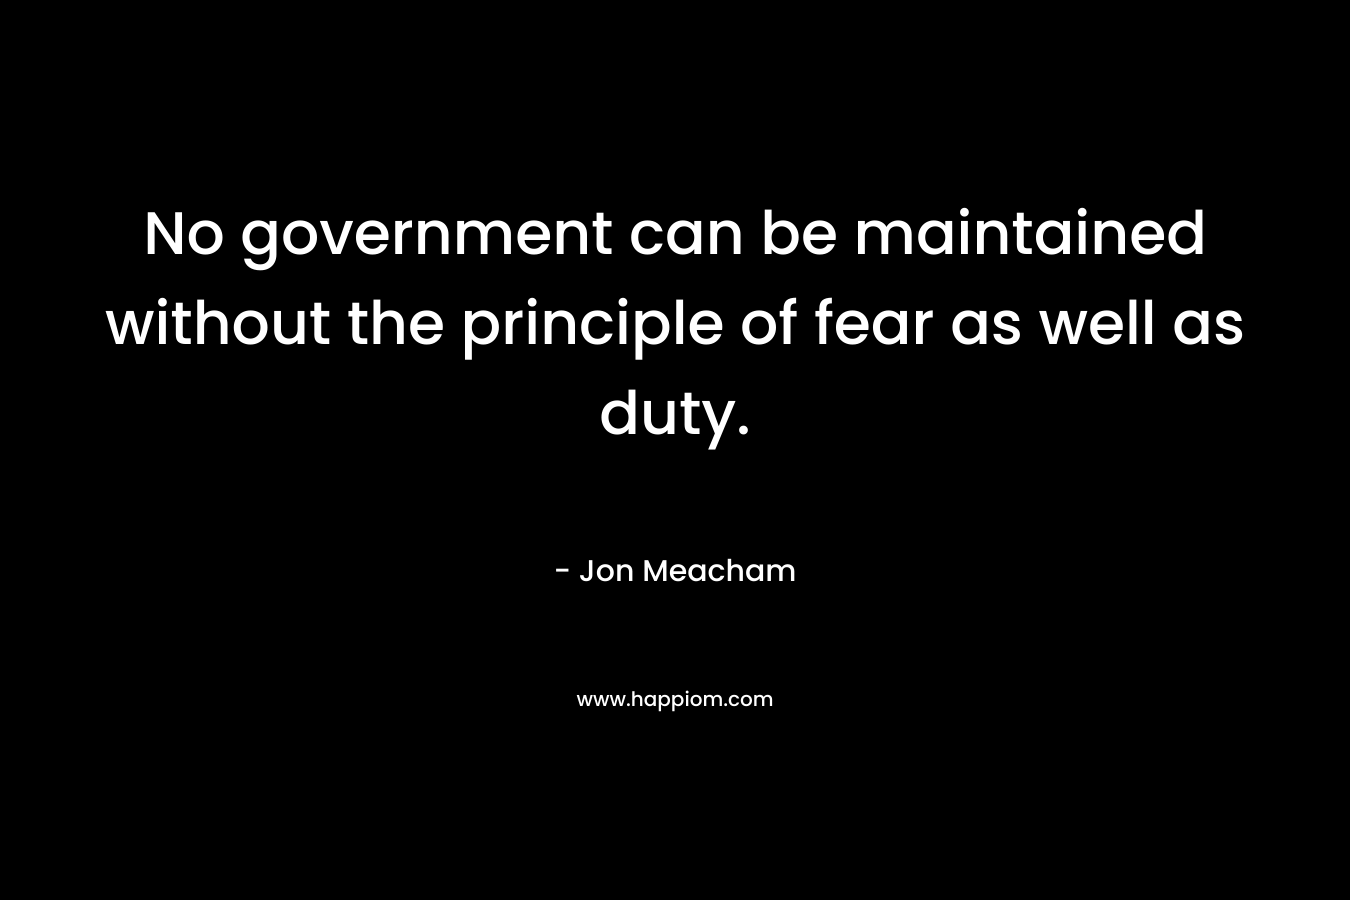 No government can be maintained without the principle of fear as well as duty.